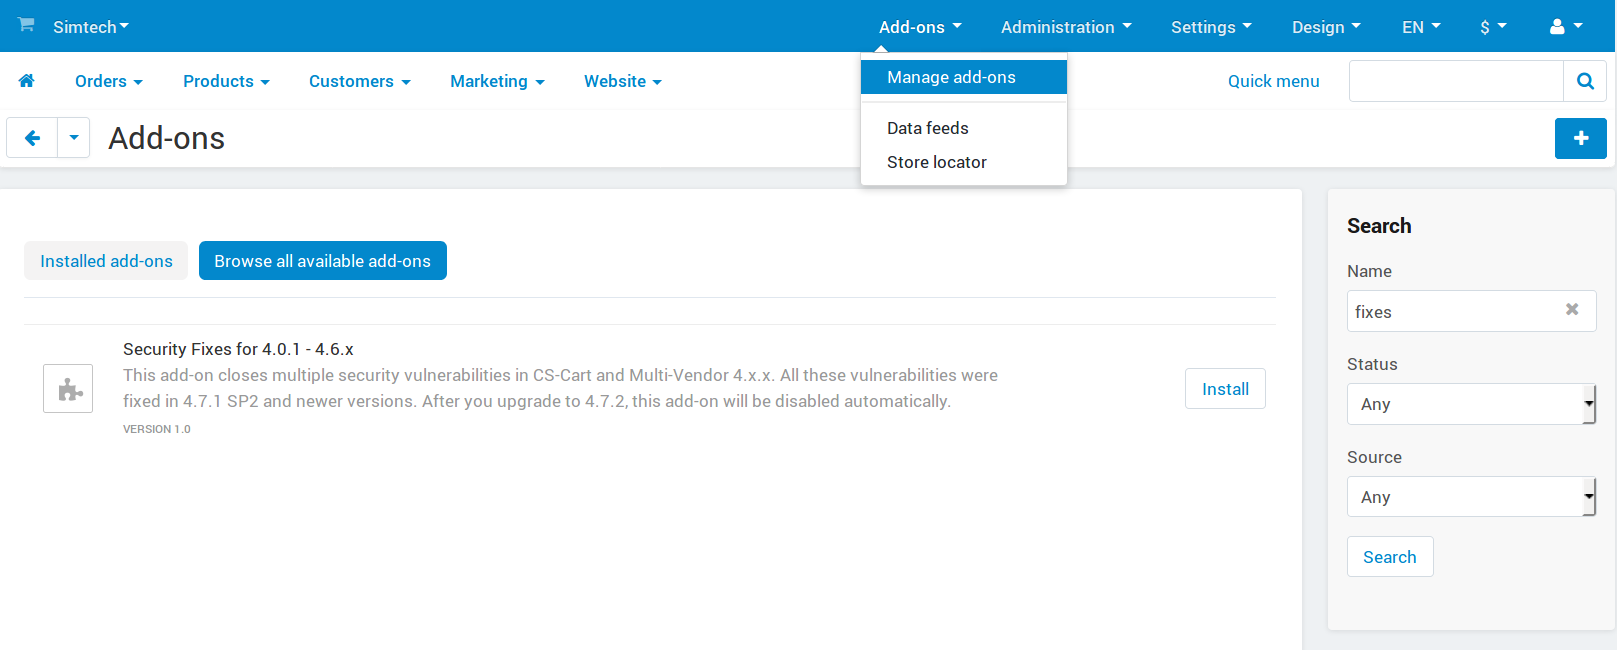 Installing an add-on in the admin panel of CS-Cart.